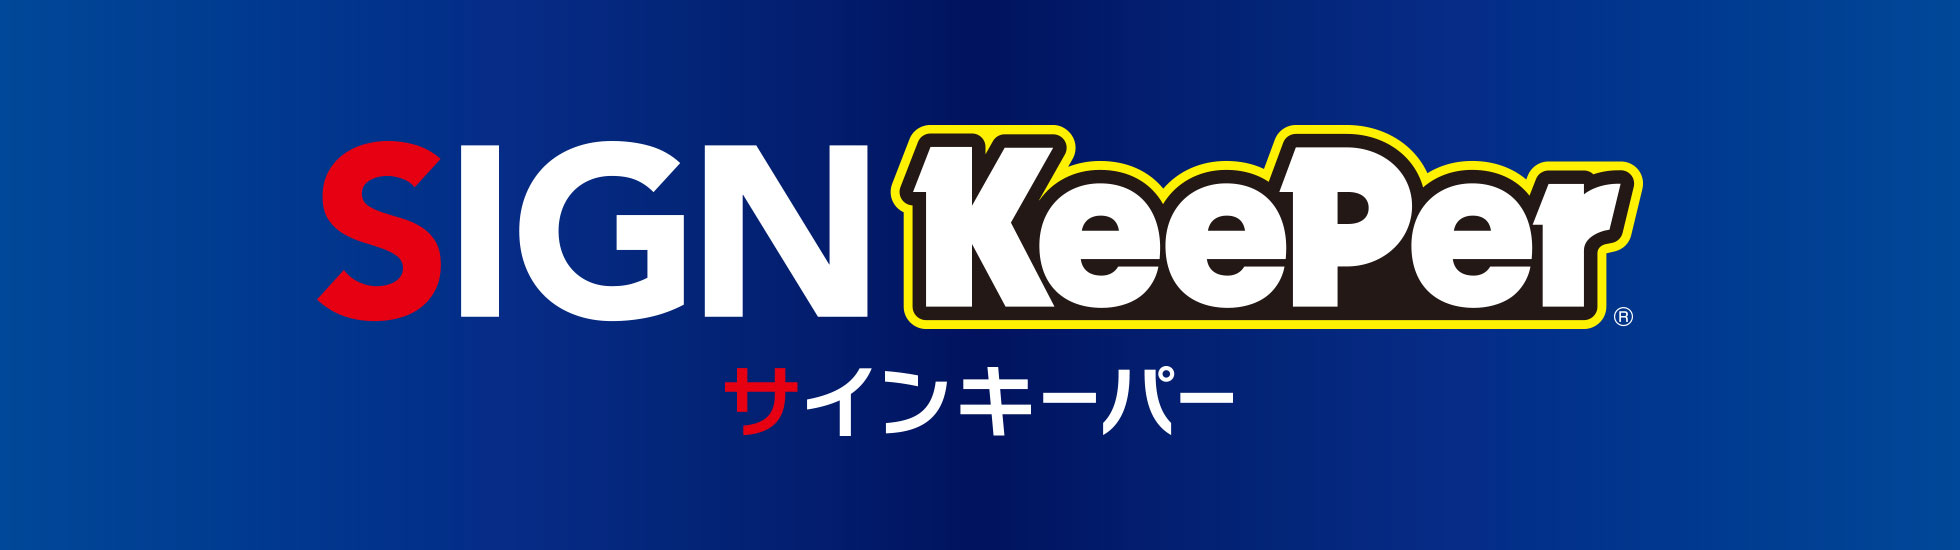 SIGN KeePerロゴ